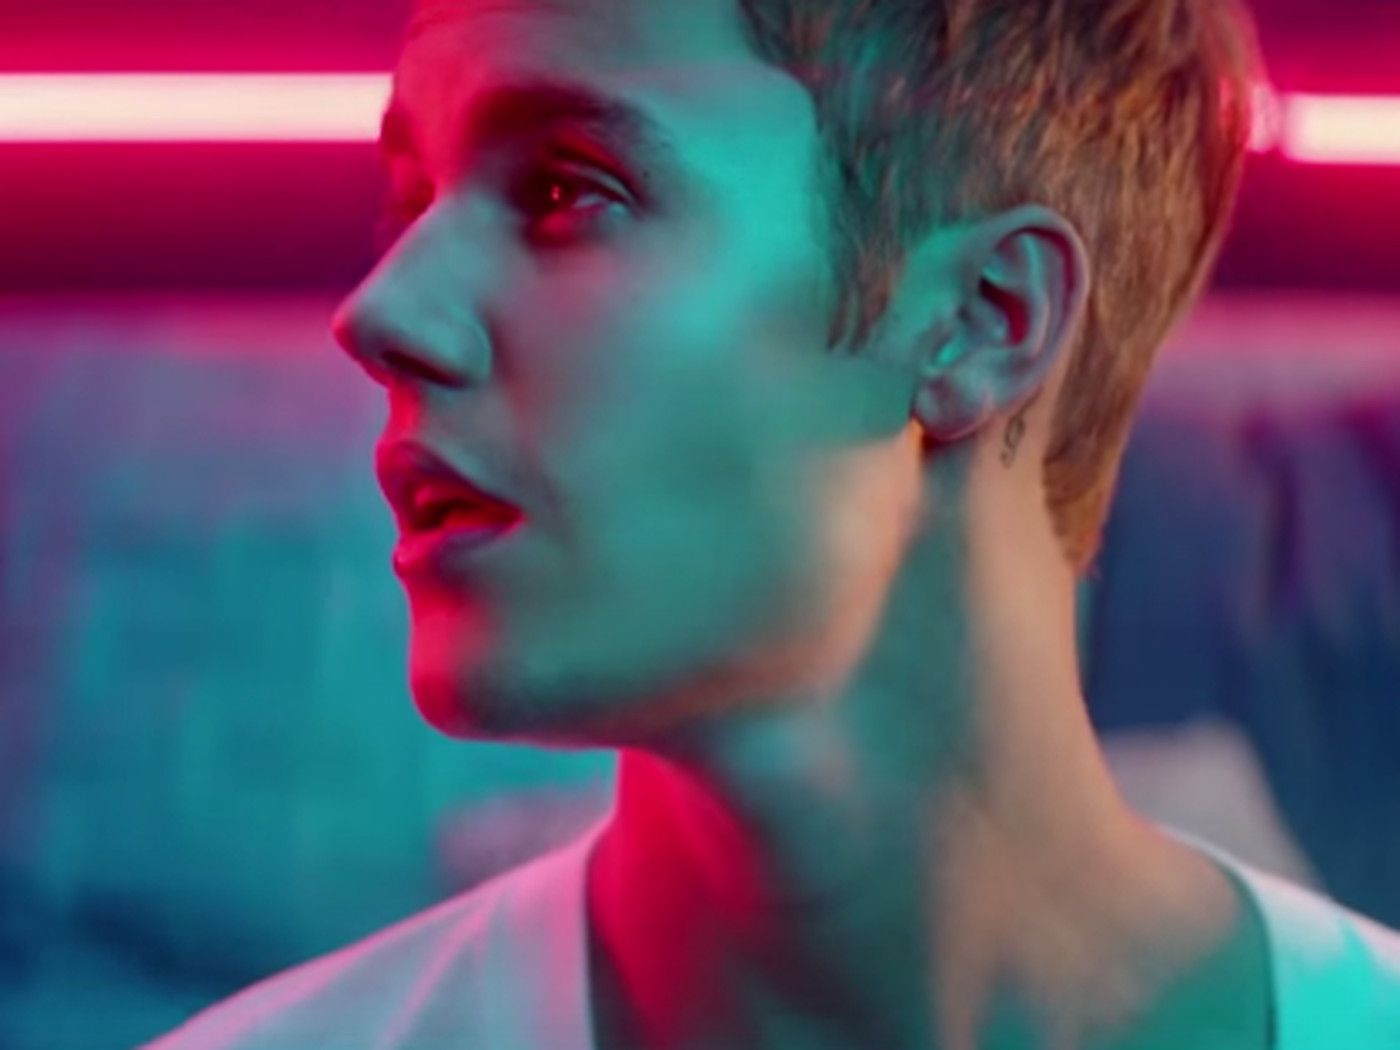 Justin Bieber steals Spotify streaming record from One Direction